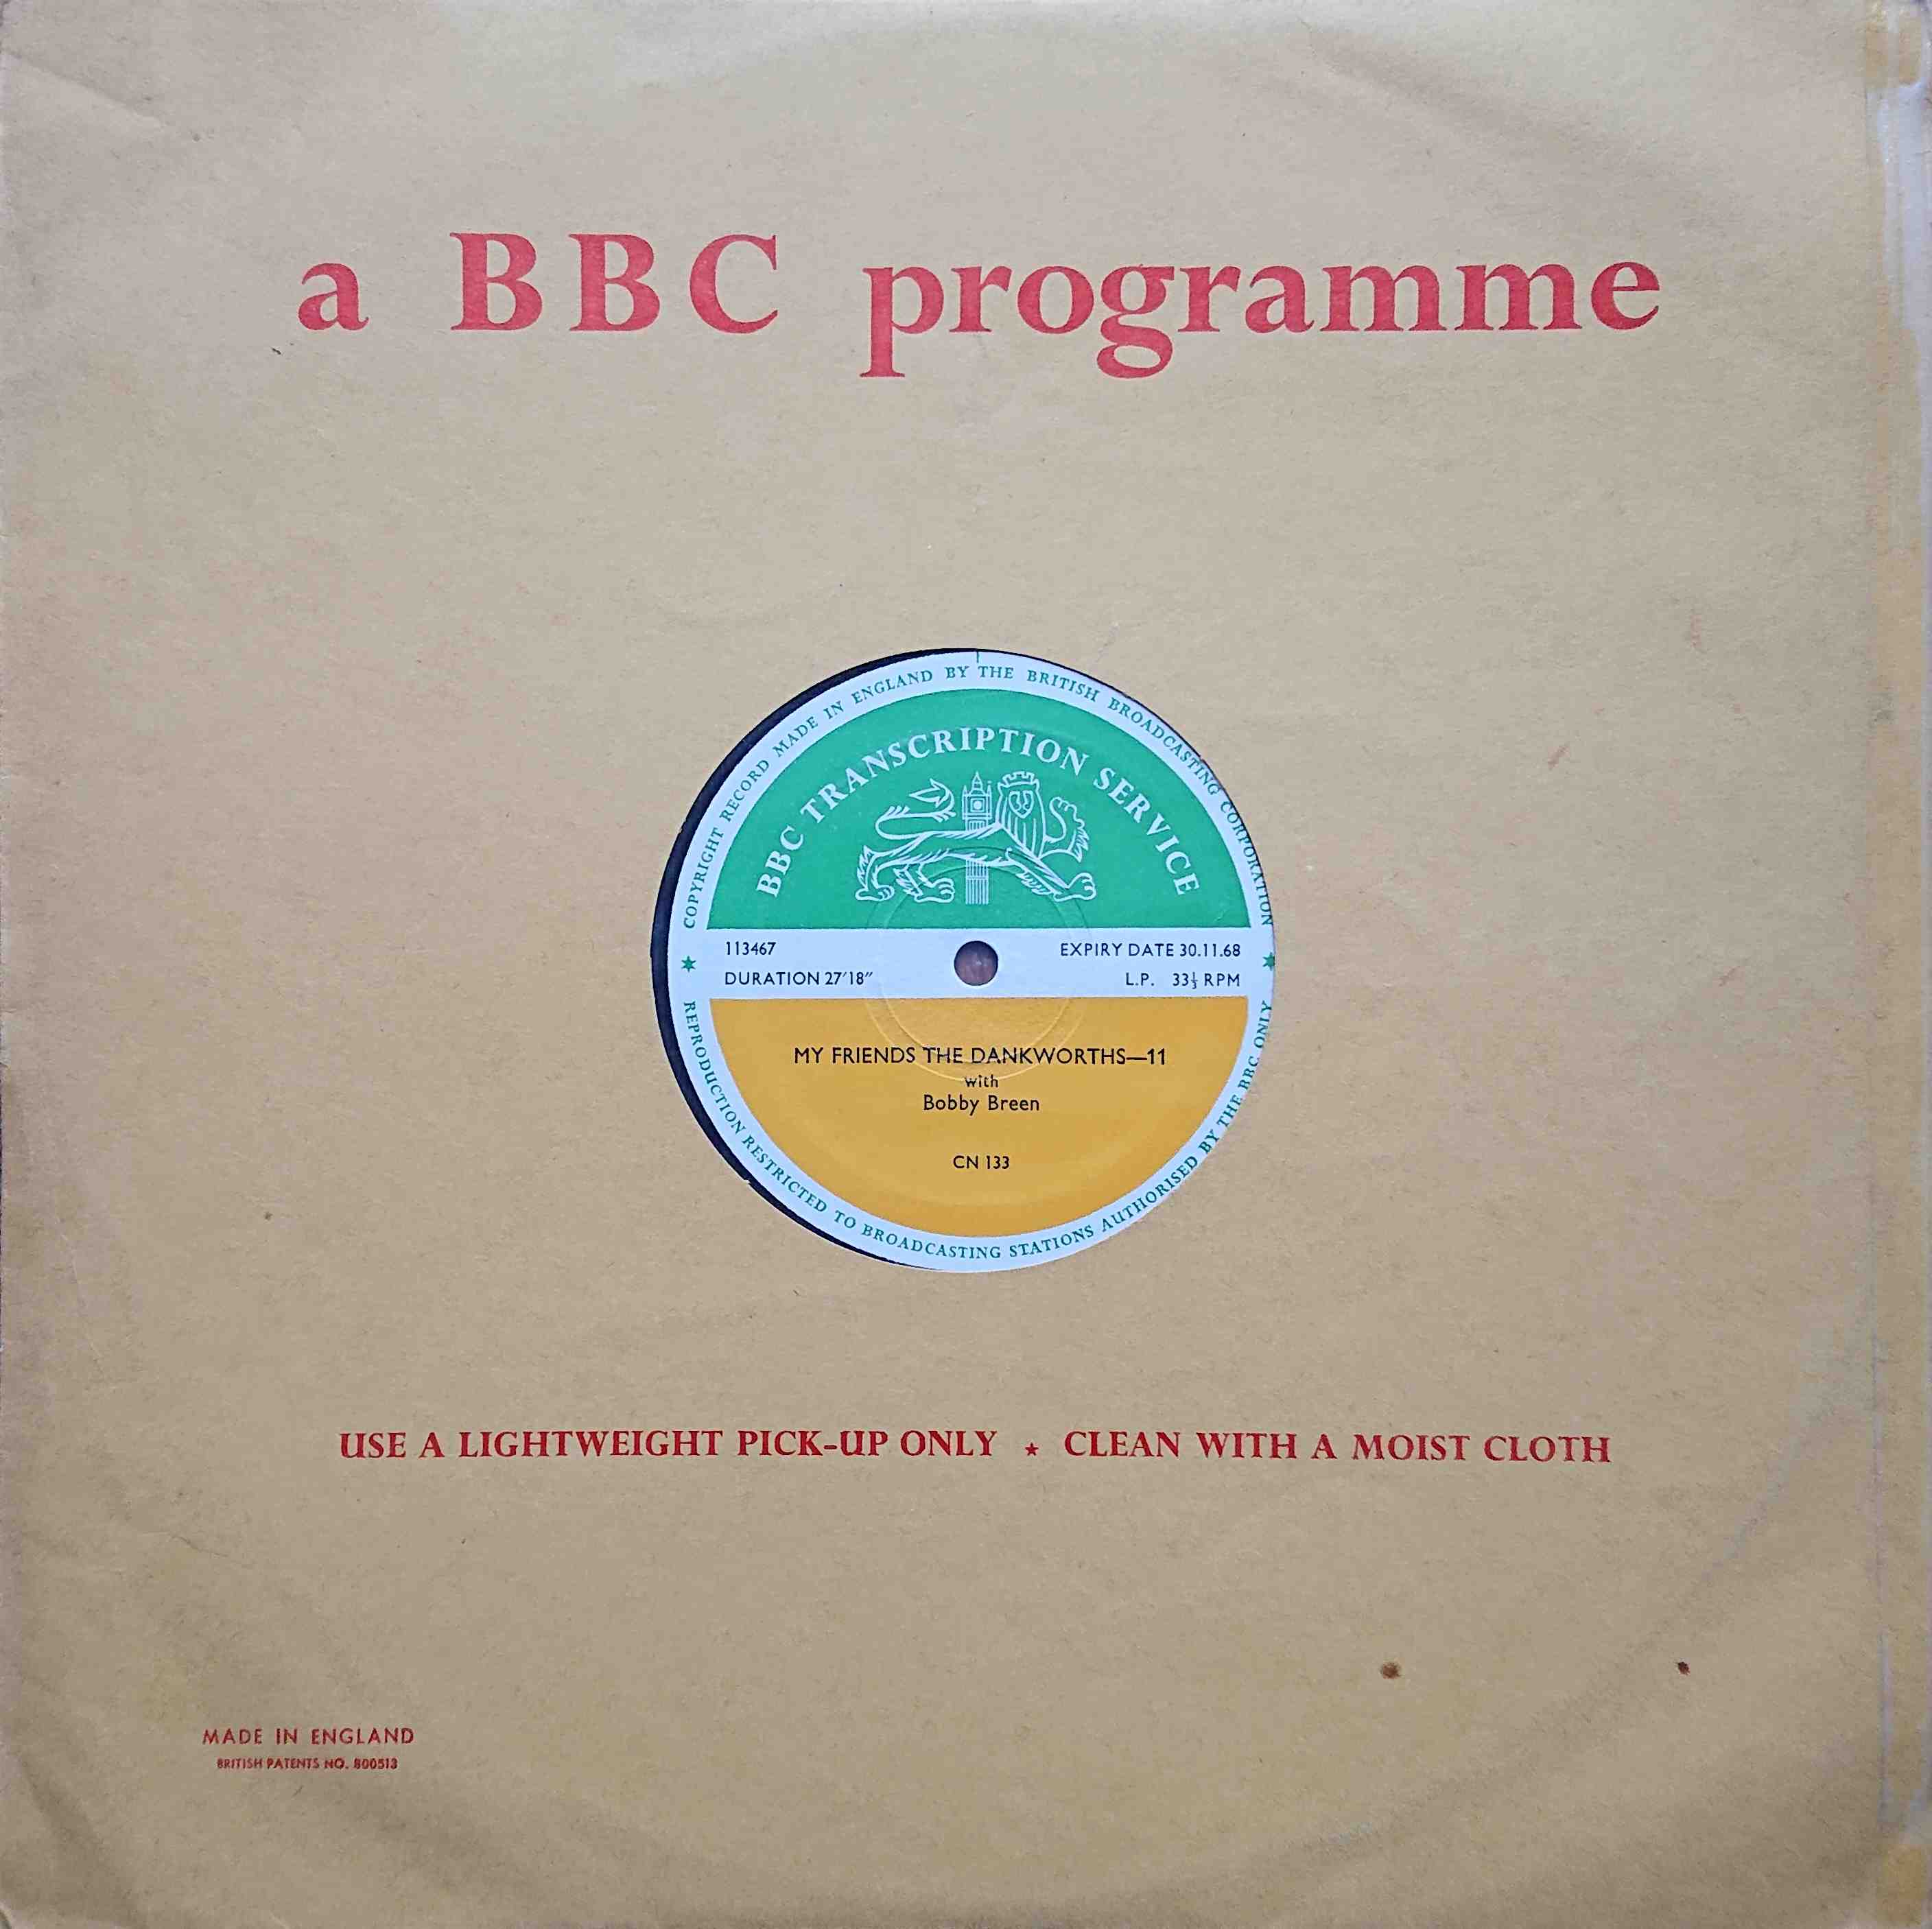 Picture of CN 133 7 My friends the Dankworths - 13 / Interlude for music 142 & 143 by artist George Brown / The harbour Lites from the BBC records and Tapes library